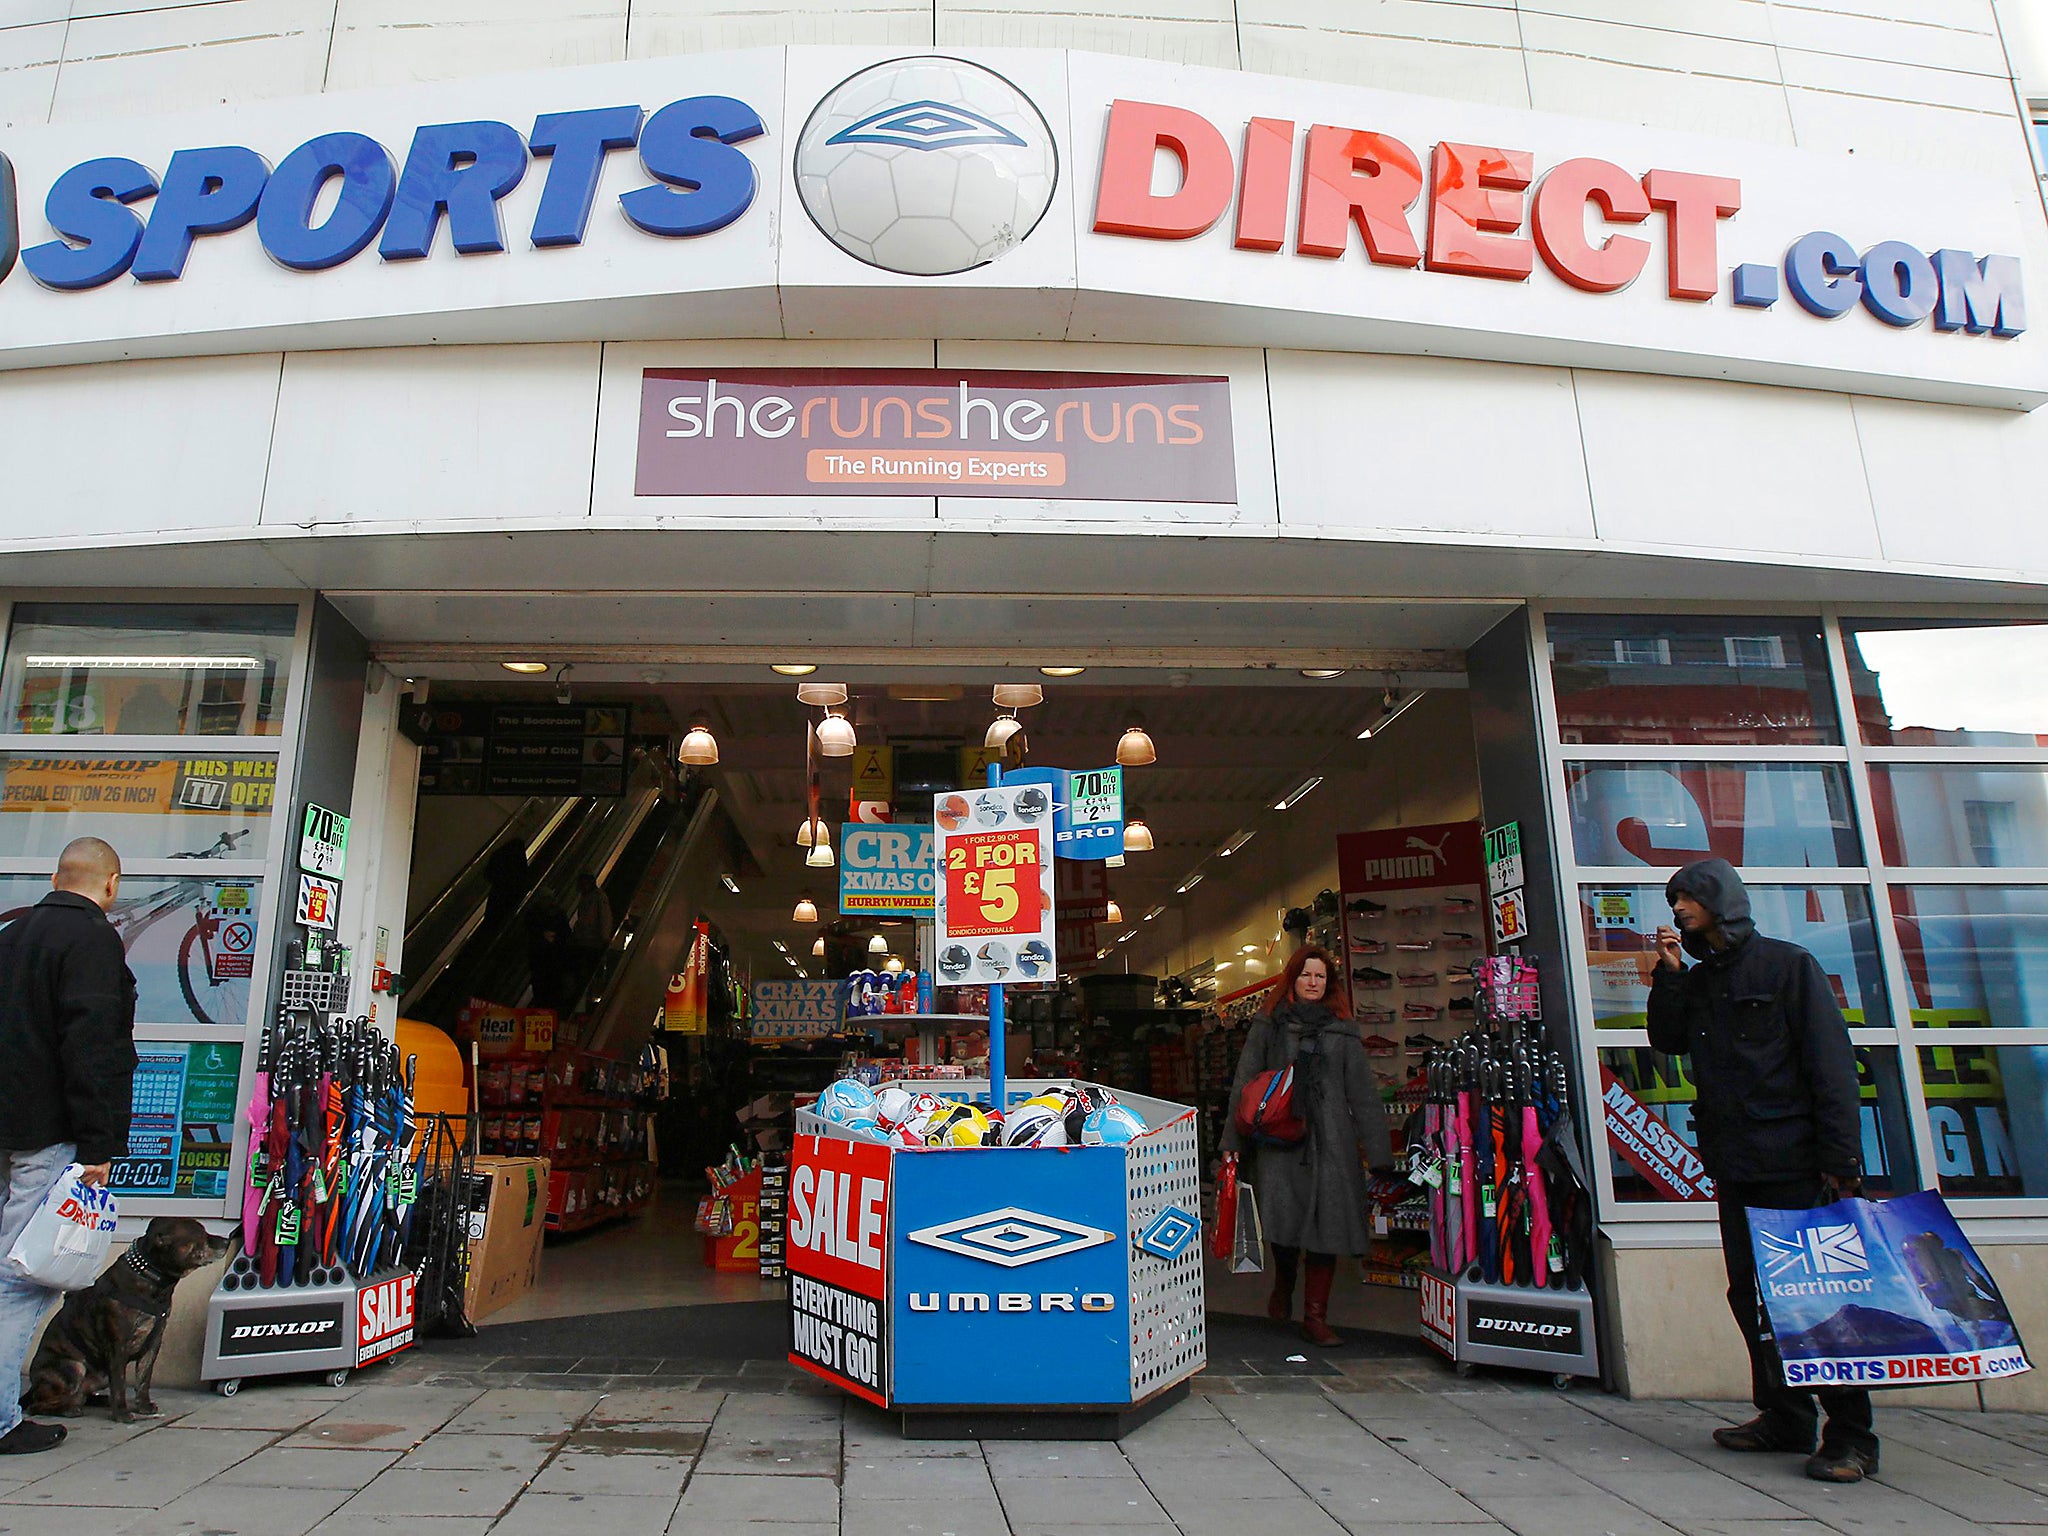 Sports Direct: The controversy over its use of zero hours contracts may have slowed their growth